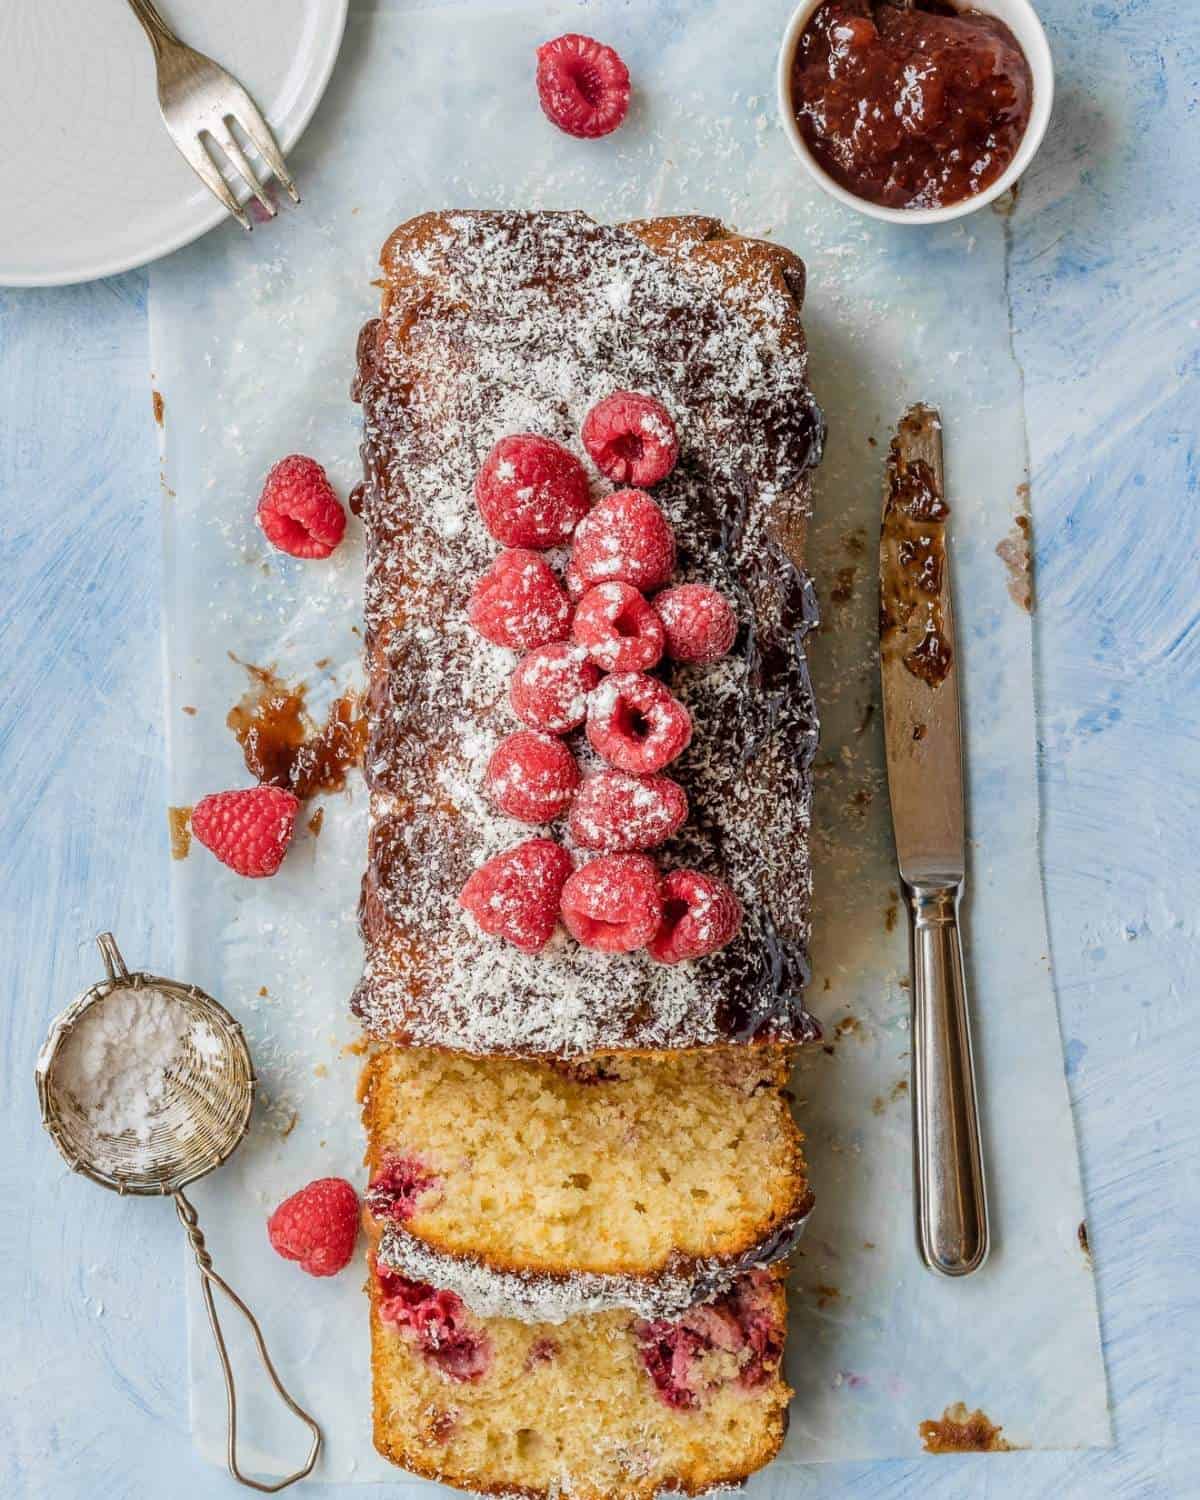 A-Coconut-and-Raspberry-Loaf-on-the-light-blue-table-with-parchment-paper-the-loaf-has-fresh-raspberries-and-icing-sugar-on-top- it-is-sliced-showing-the -raspberries-inside-there-are-a-bowl-of -jam-and-a knife-aside